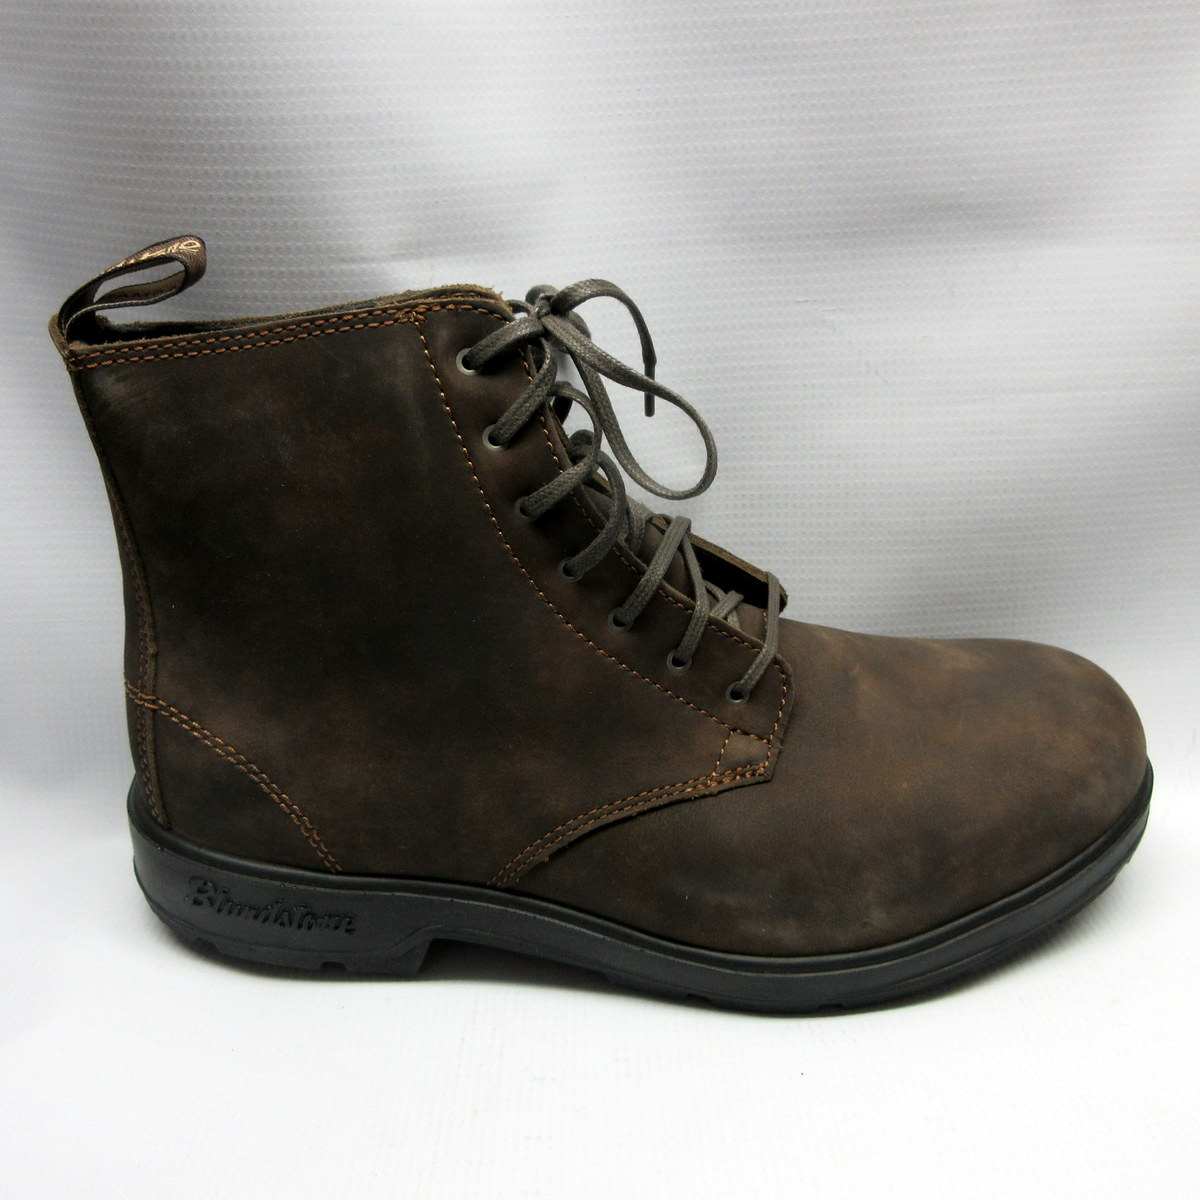 Blundstone Boots 1450 Lined Lace-up in 